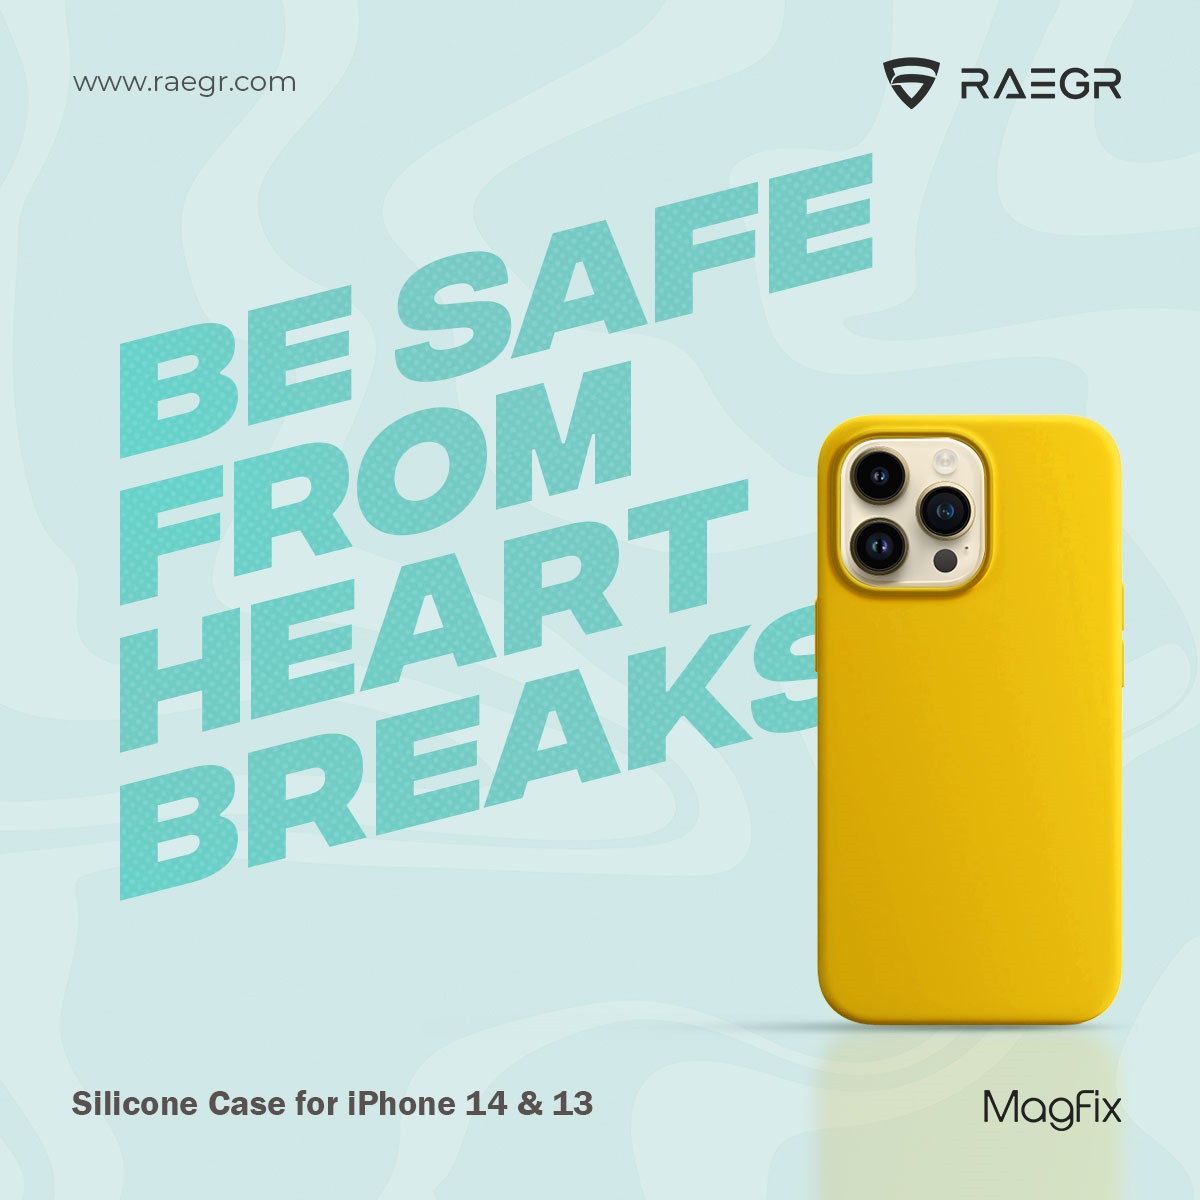 Avoid helplessness—keep it safe from drops, bumps, and tumbles with the RAEGR MagFix Silicone Case. 

Buy Now!
Raegr:postly.app/3LJv
Tekkitake:postly.app/3LJw
Amazon:postly.app/3LJy

#RAEGR #MagFix #iPhone14Case